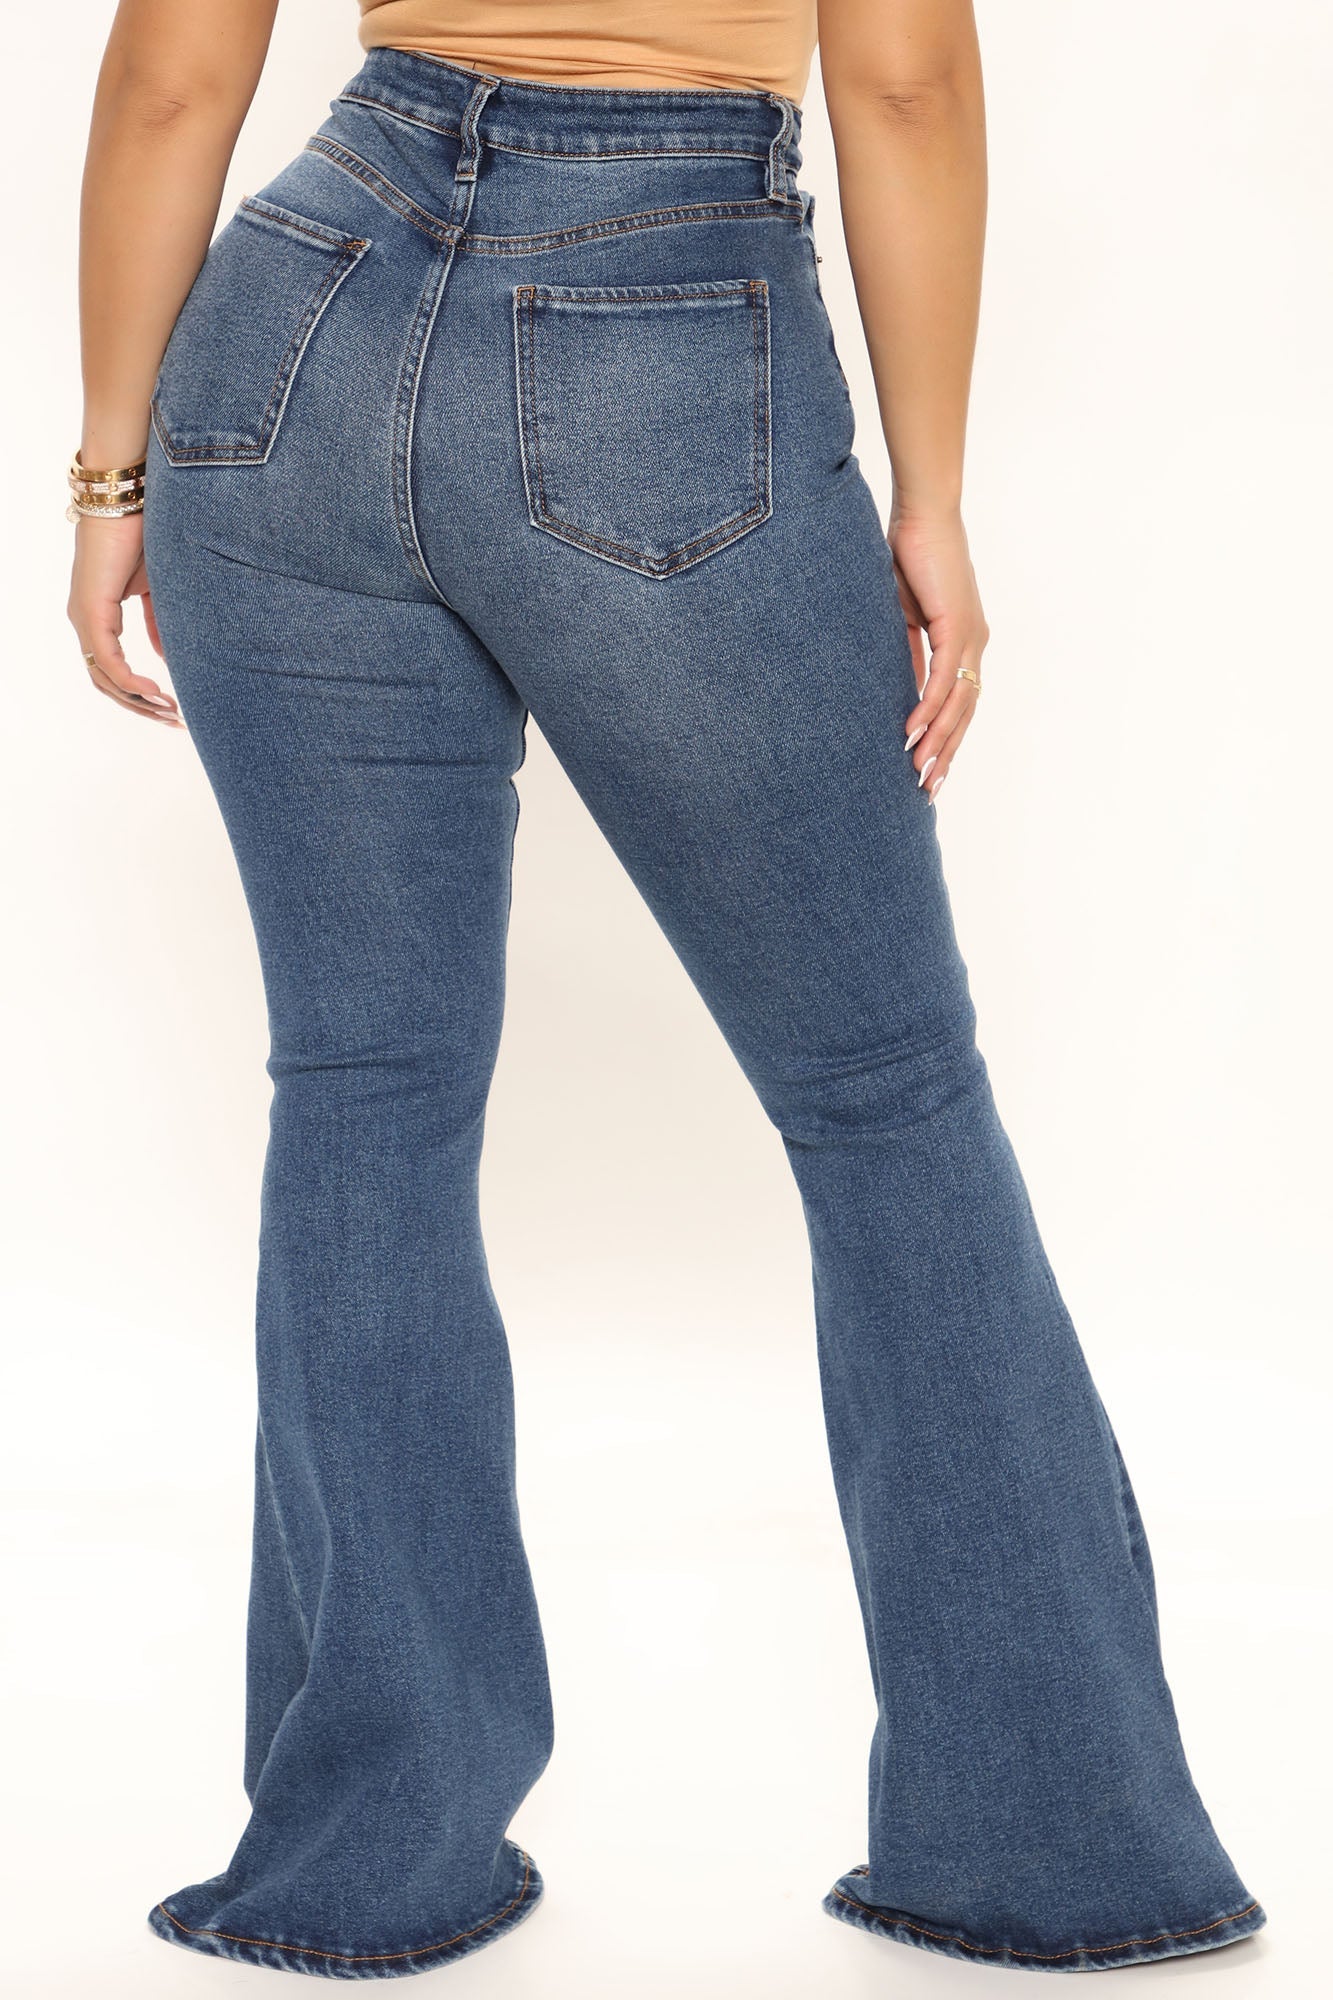 Dream On Recycled High Waist Flare Jeans - Dark Wash Ins Street